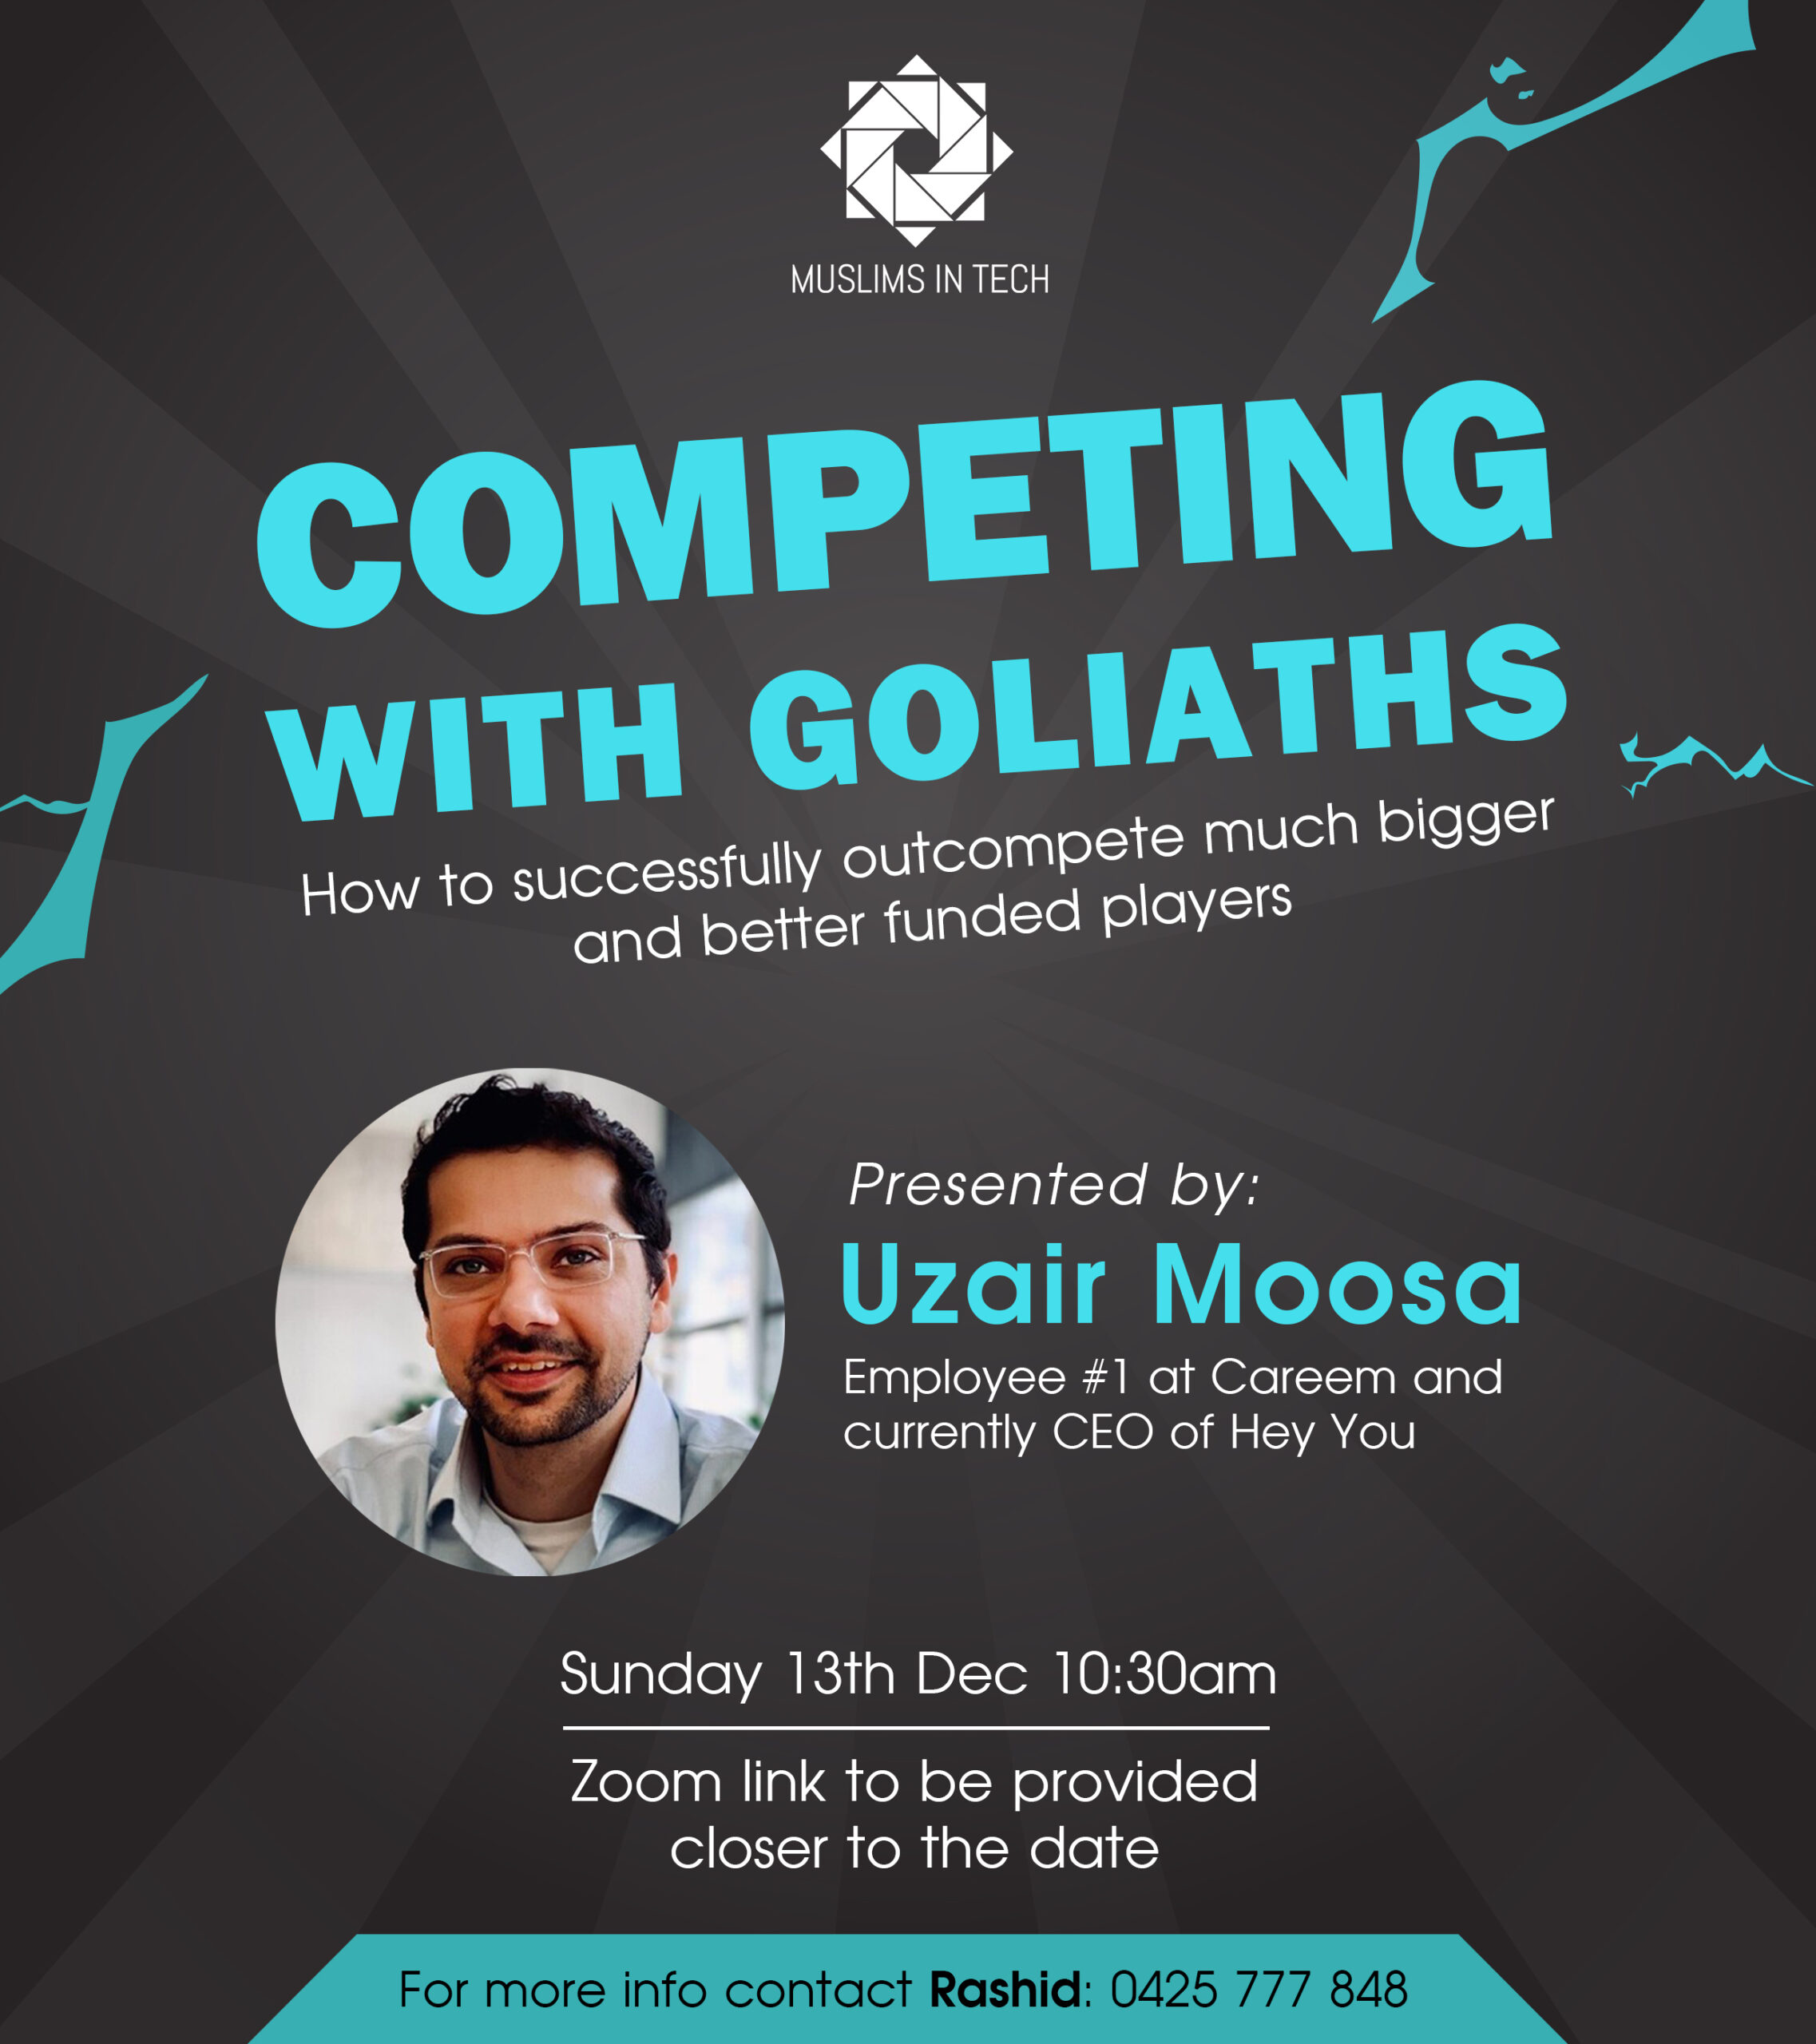 Competing with Goliaths!